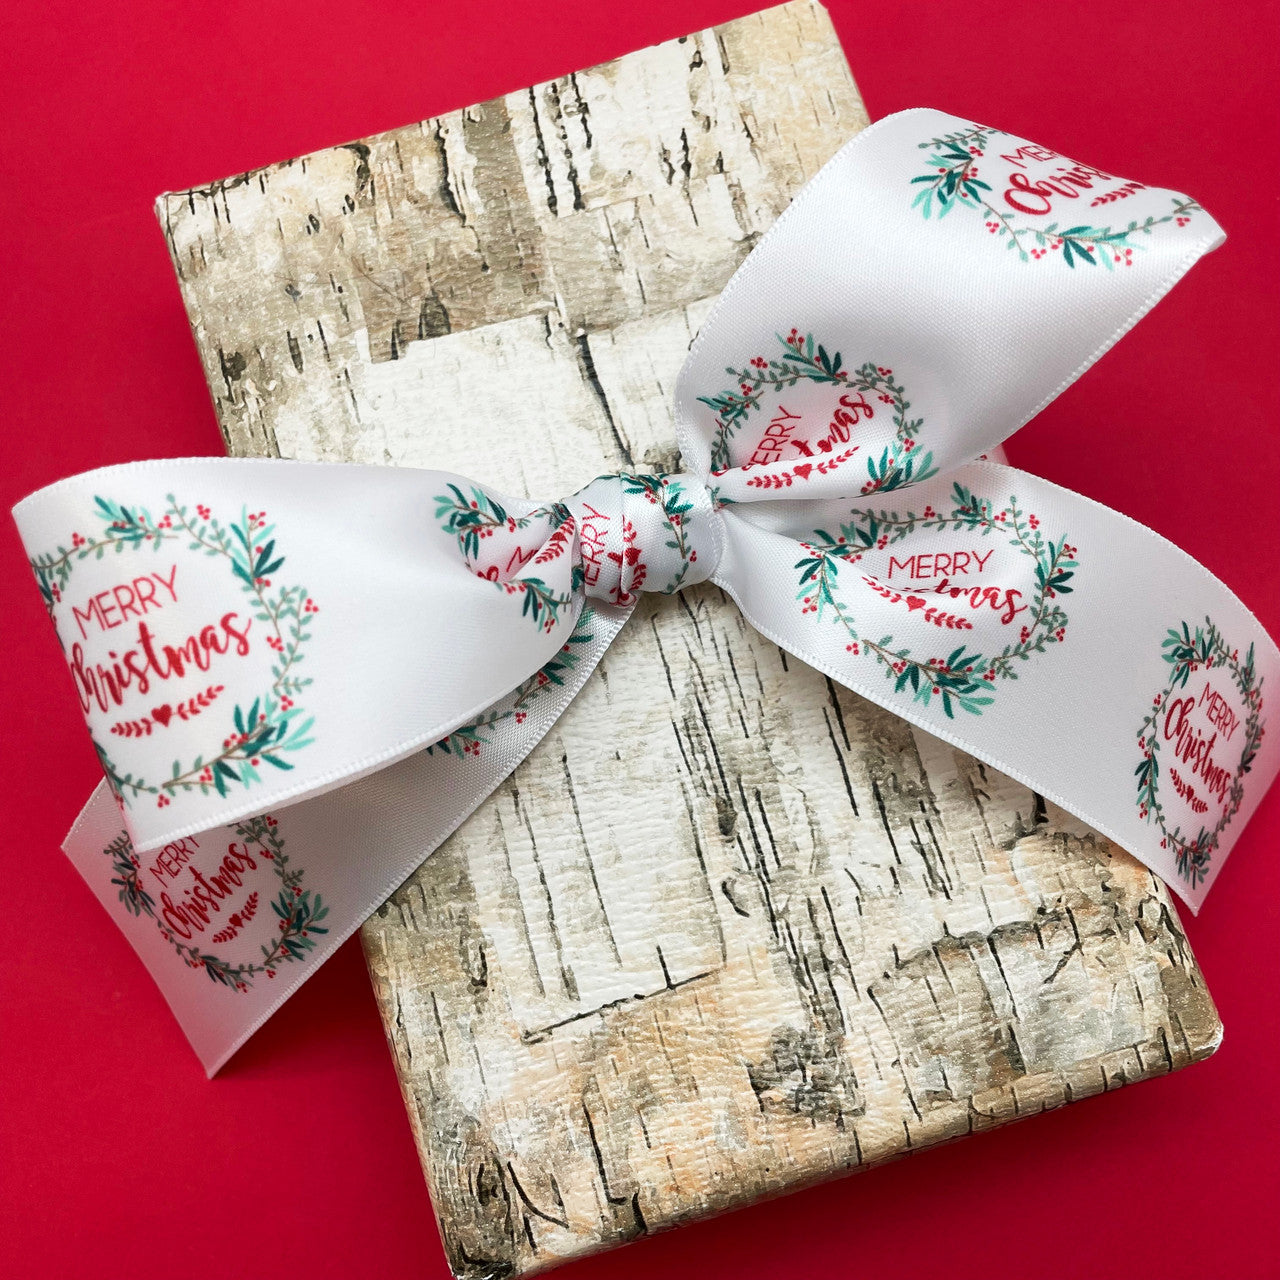 Tie our Christmas wreath ribbon in a beautiful bow for the perfect gift wrap!